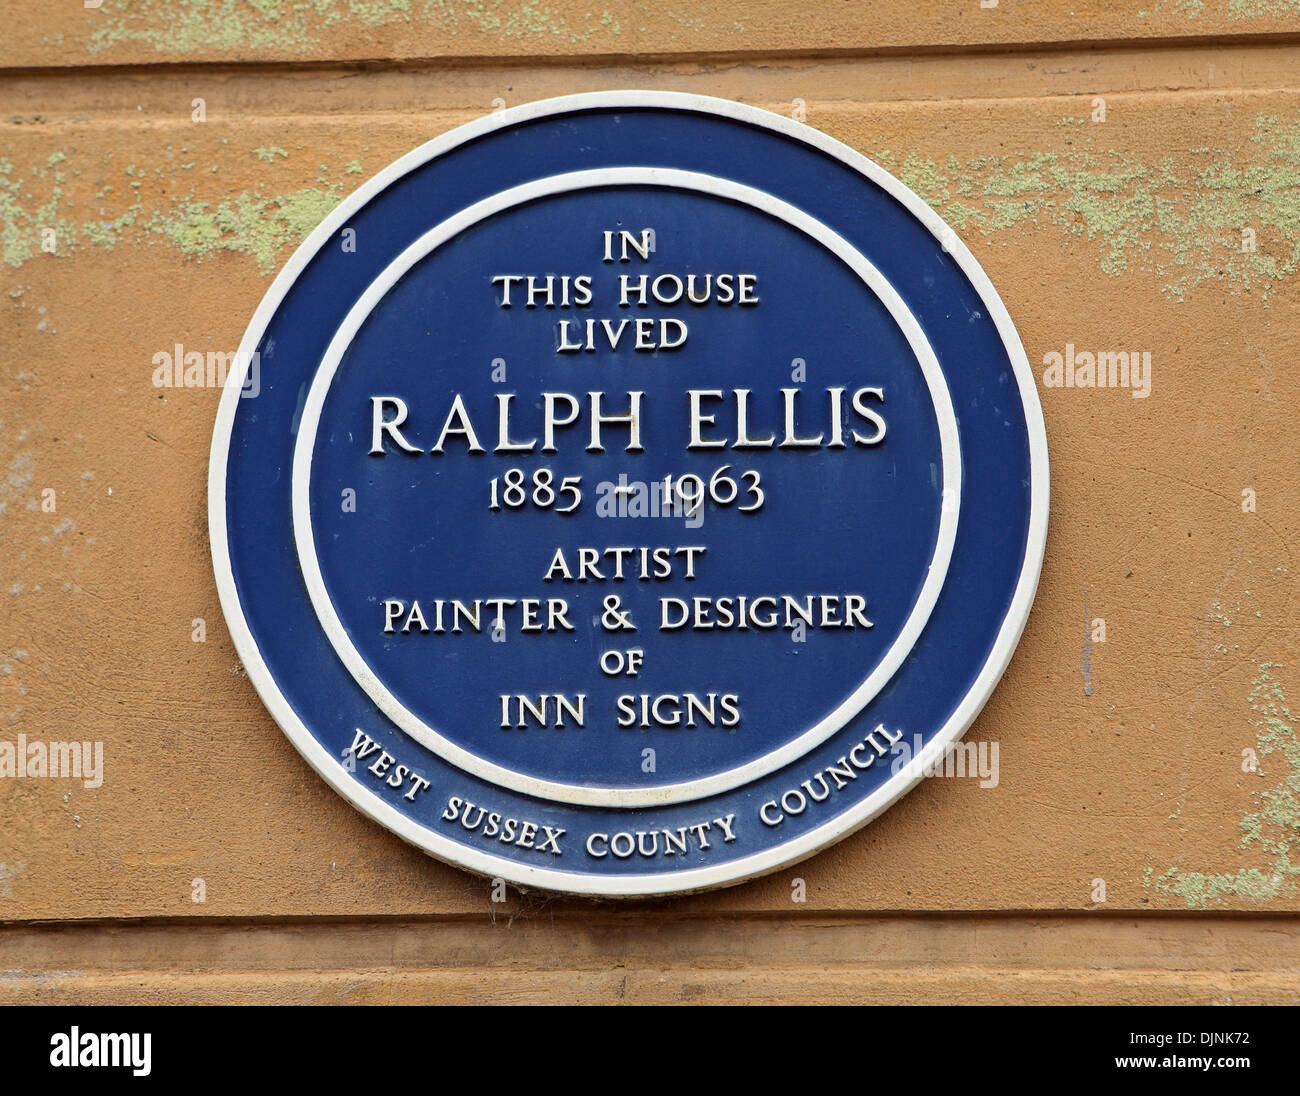 Commemorative plaque outside the former house of Ralph Ellis Artist in Arundel, South Downs in West Sussex, England Stock Photo